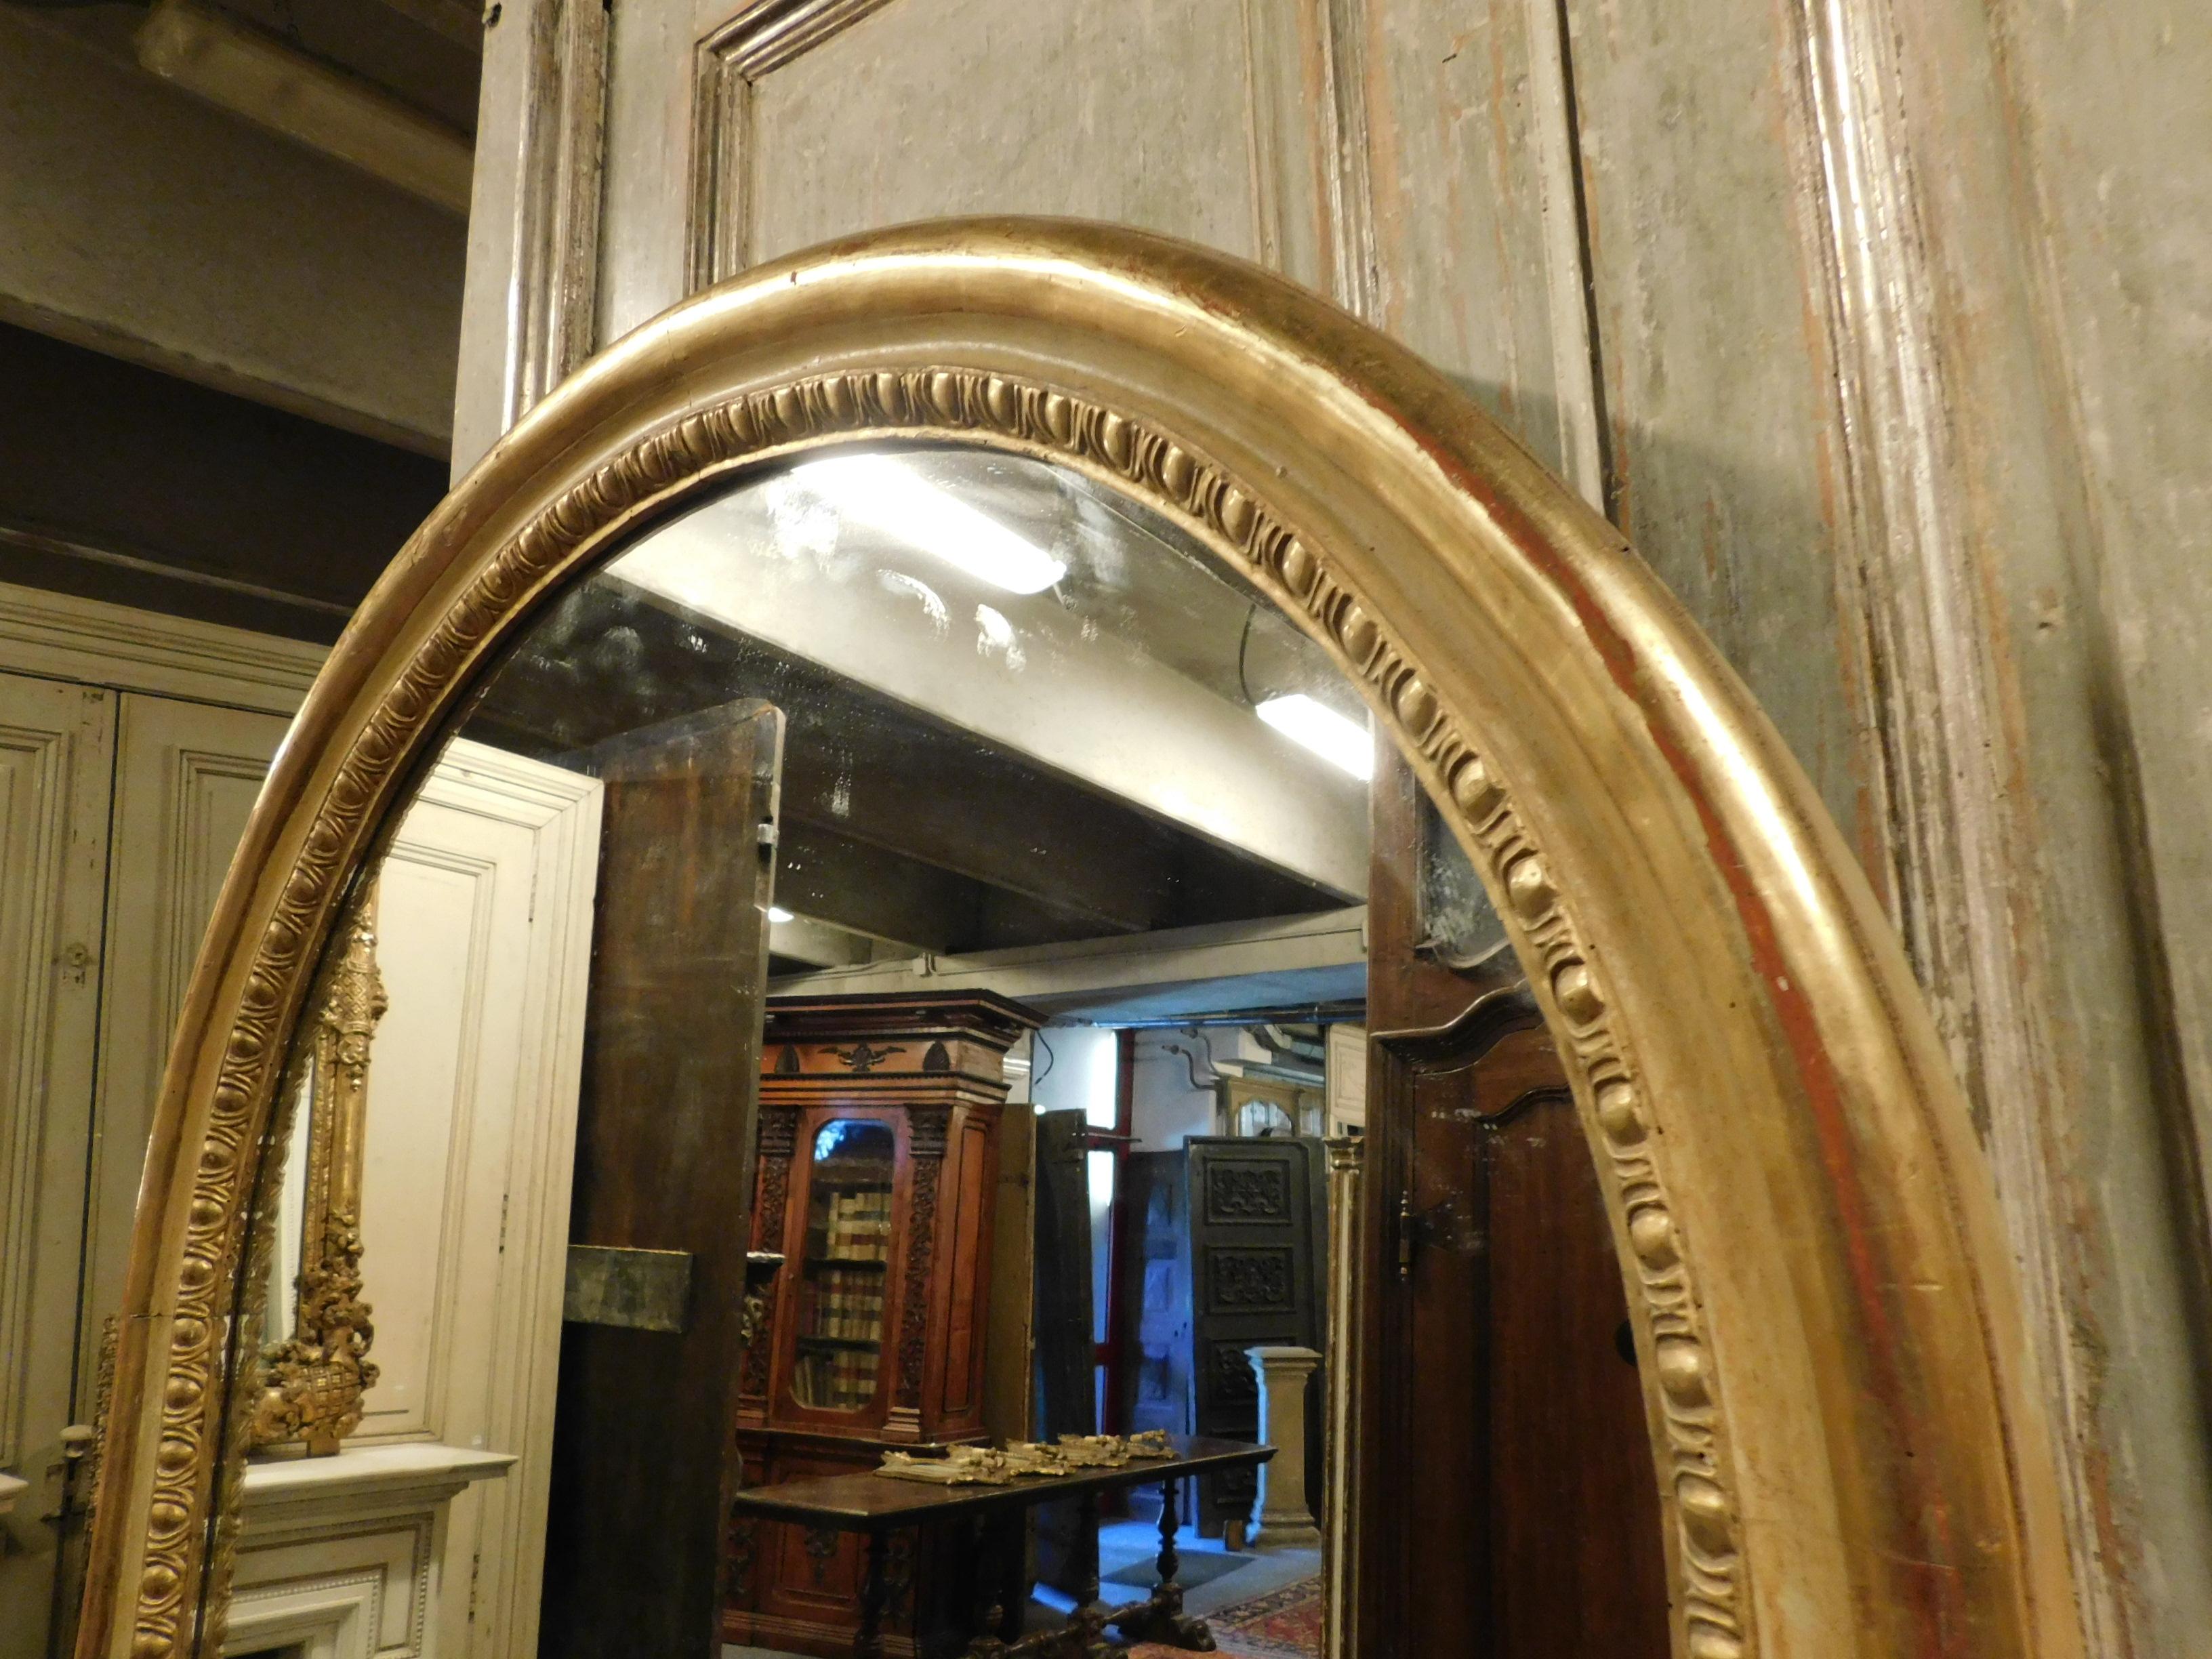 Italian Antique Mirror Early 1800, Gold Leaf, Arched Form with New Mirror